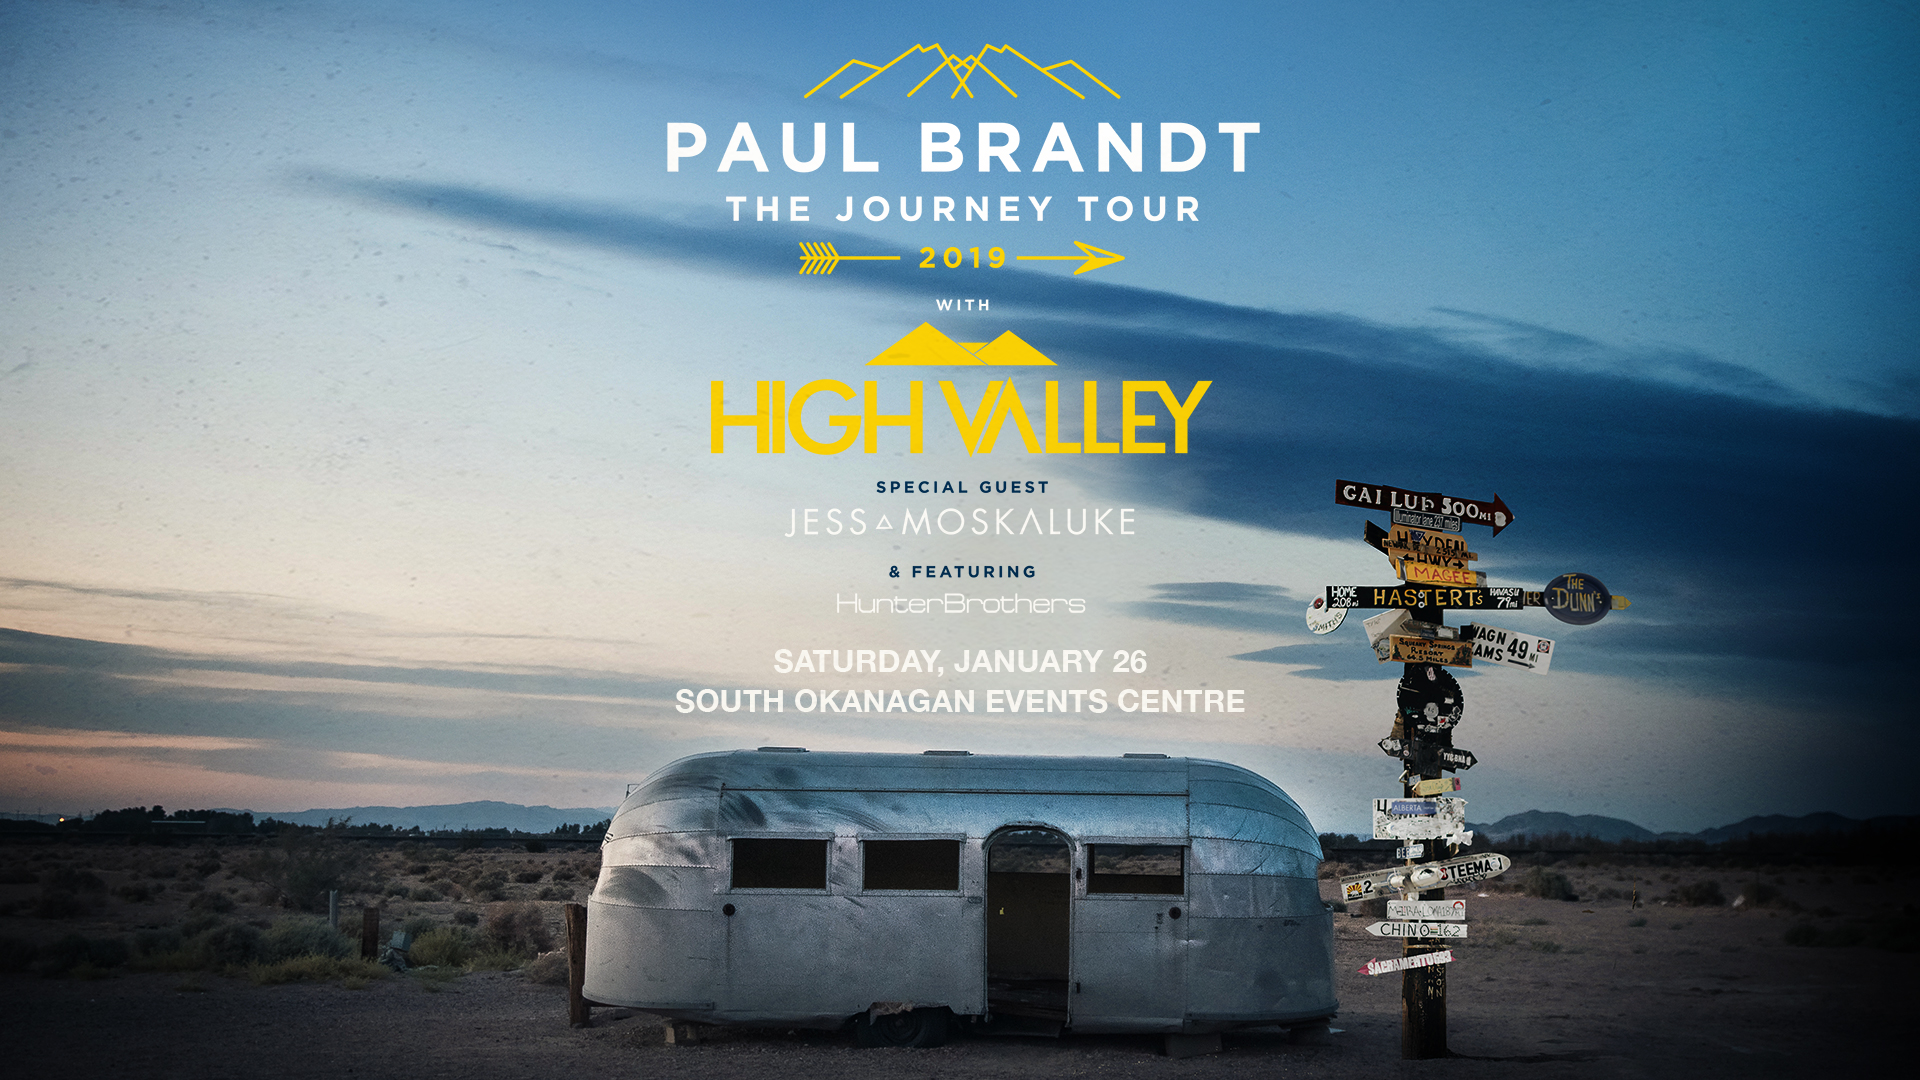 Paul Brandt, the Journey Tour and High Valley with special guest Jess Moskaluke featuring Hunter Brothers, Sat. January 26, 2019, South Okanagan Events Centre in Peniticton, BC